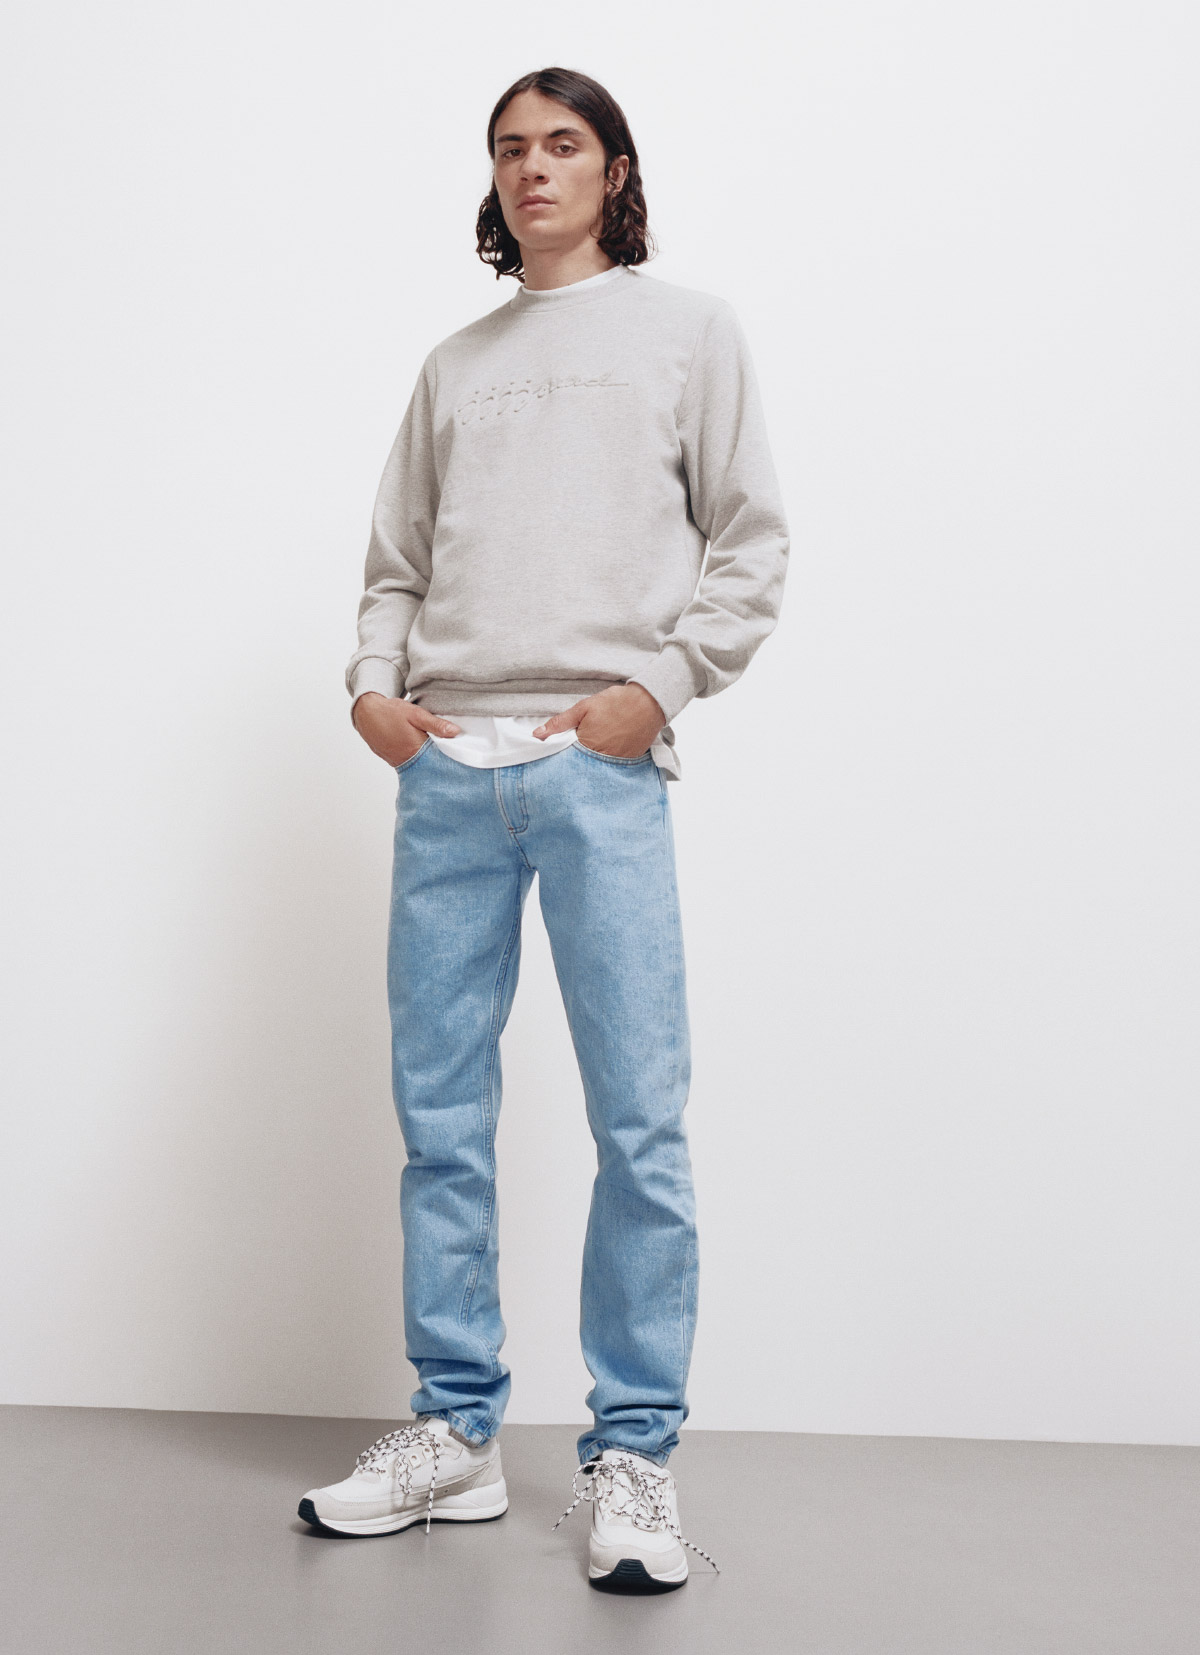 A.P.C. x JJJJound Collection: Release Date & Where to Buy